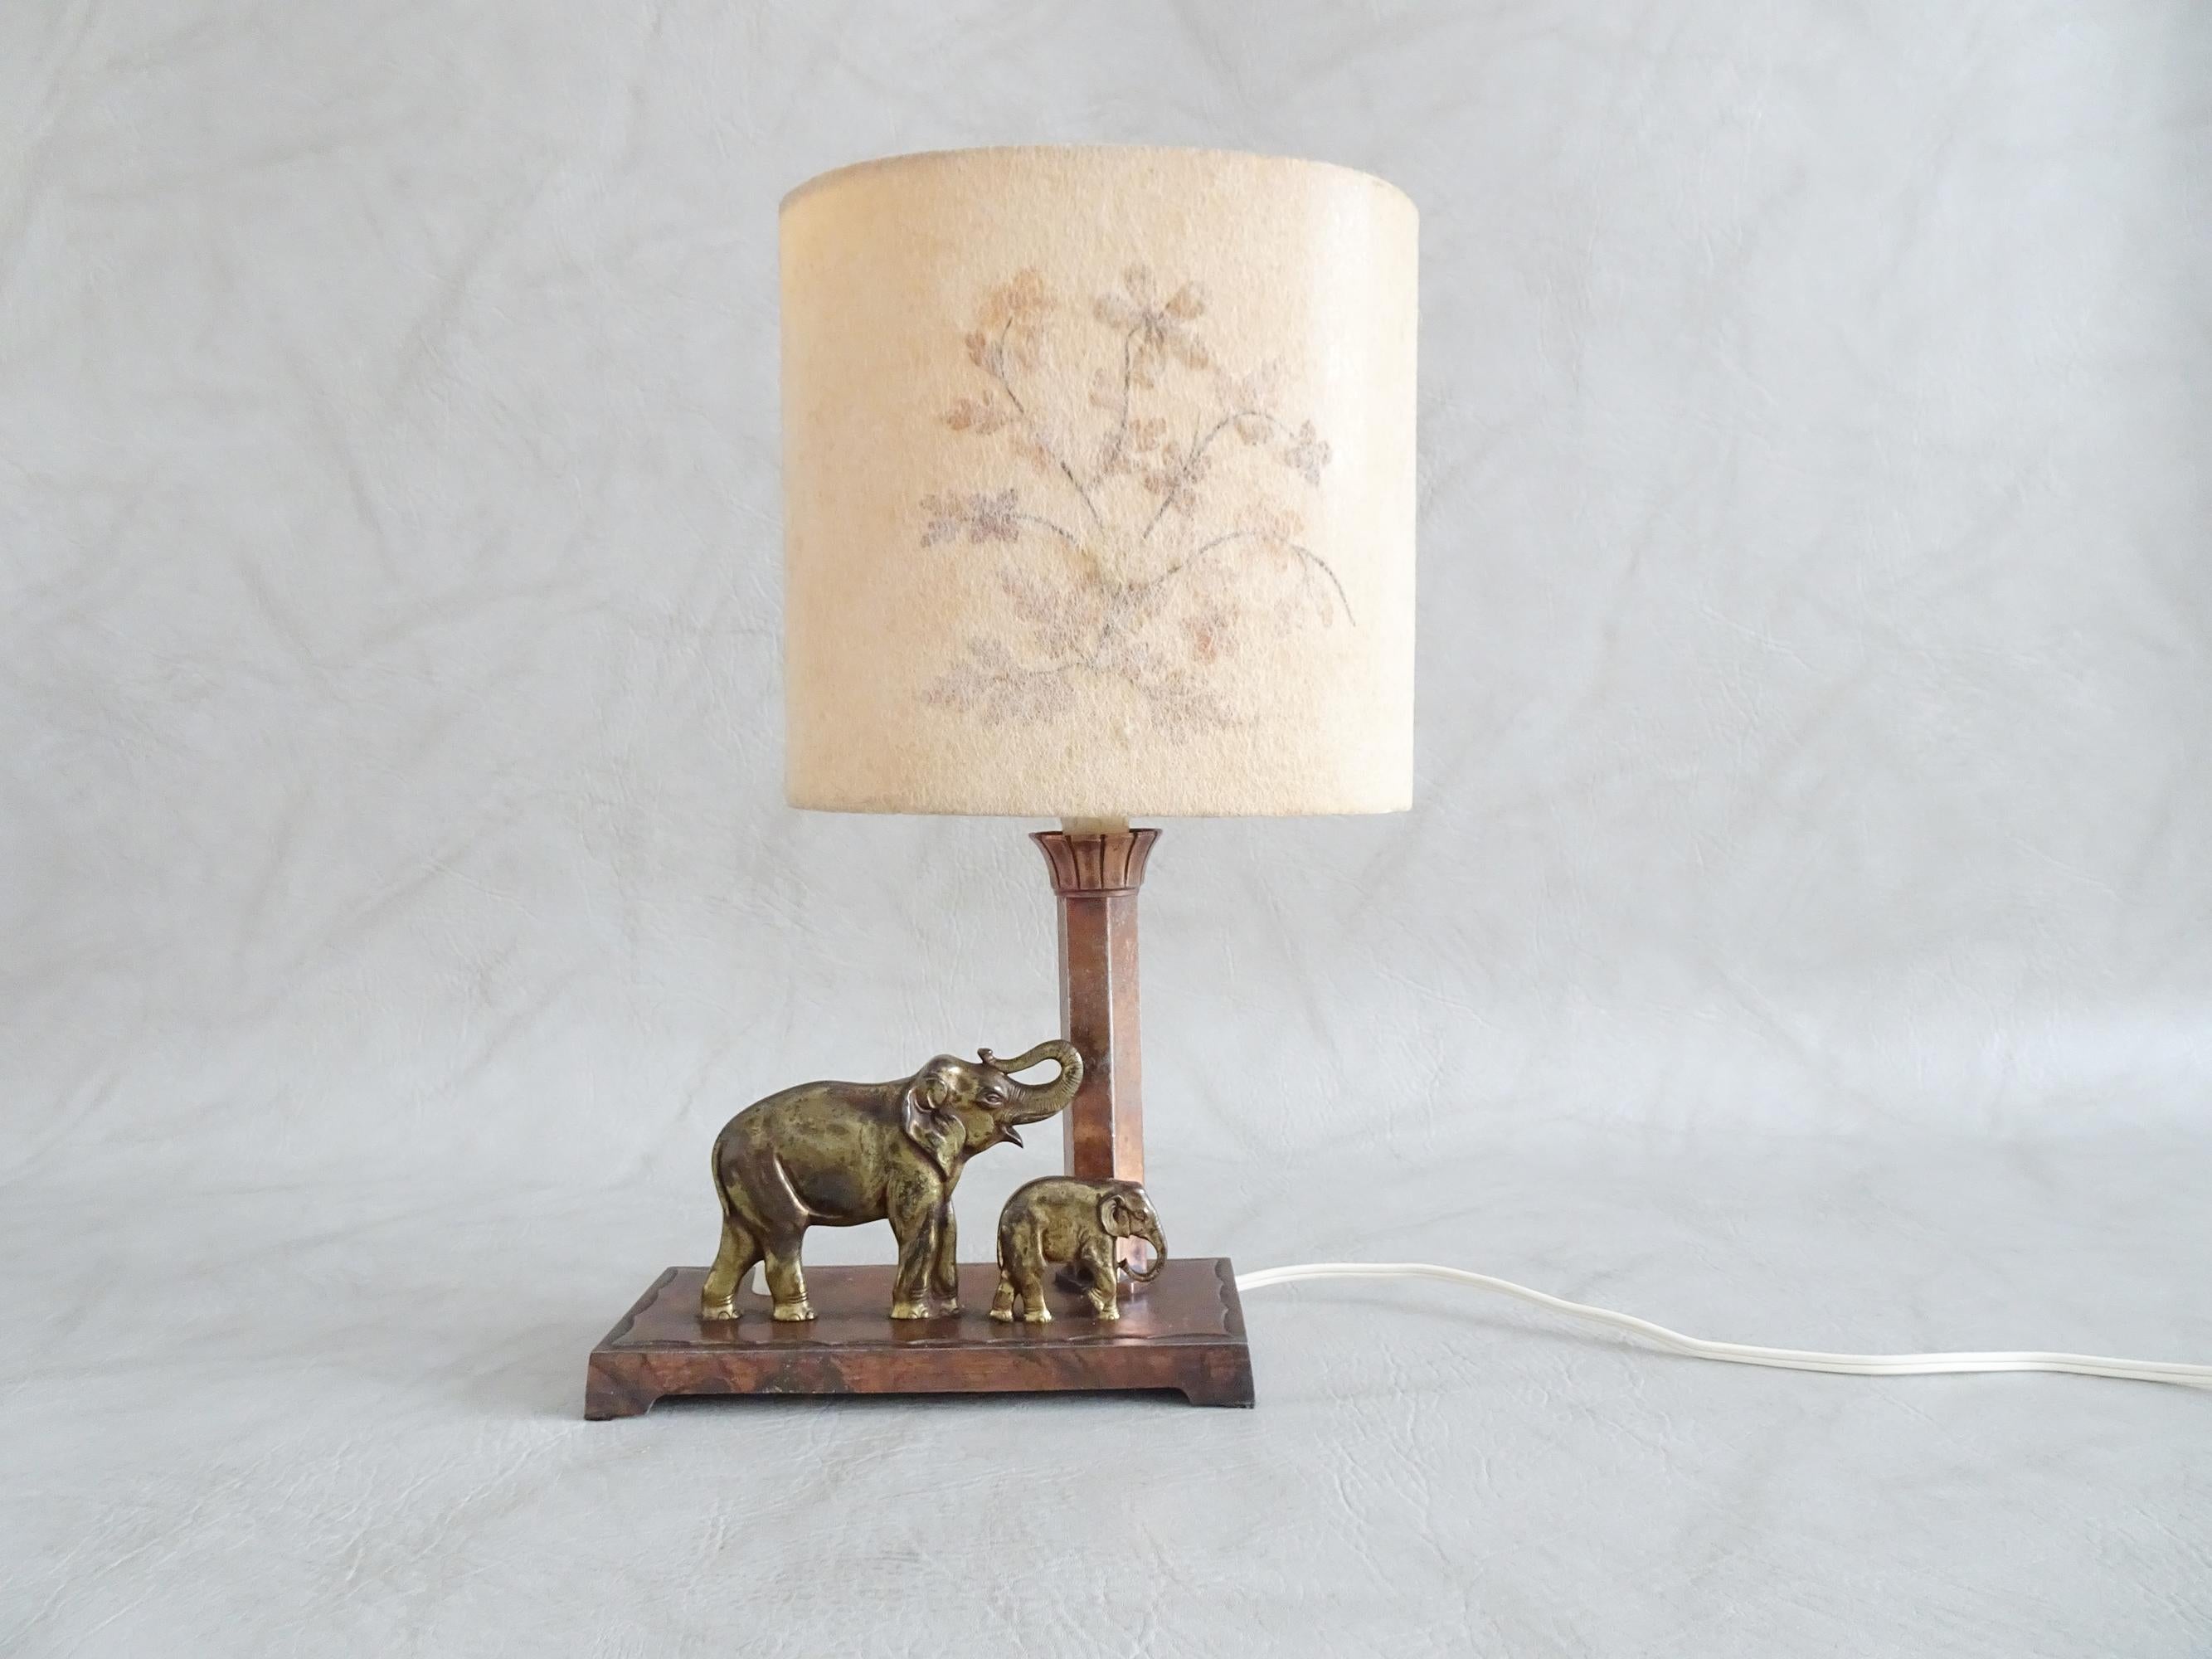 Midcentury table desk lamp elephants, France, 1940s.
Patinated copper foot and brass sculptures. Original shade with dryed flowers.